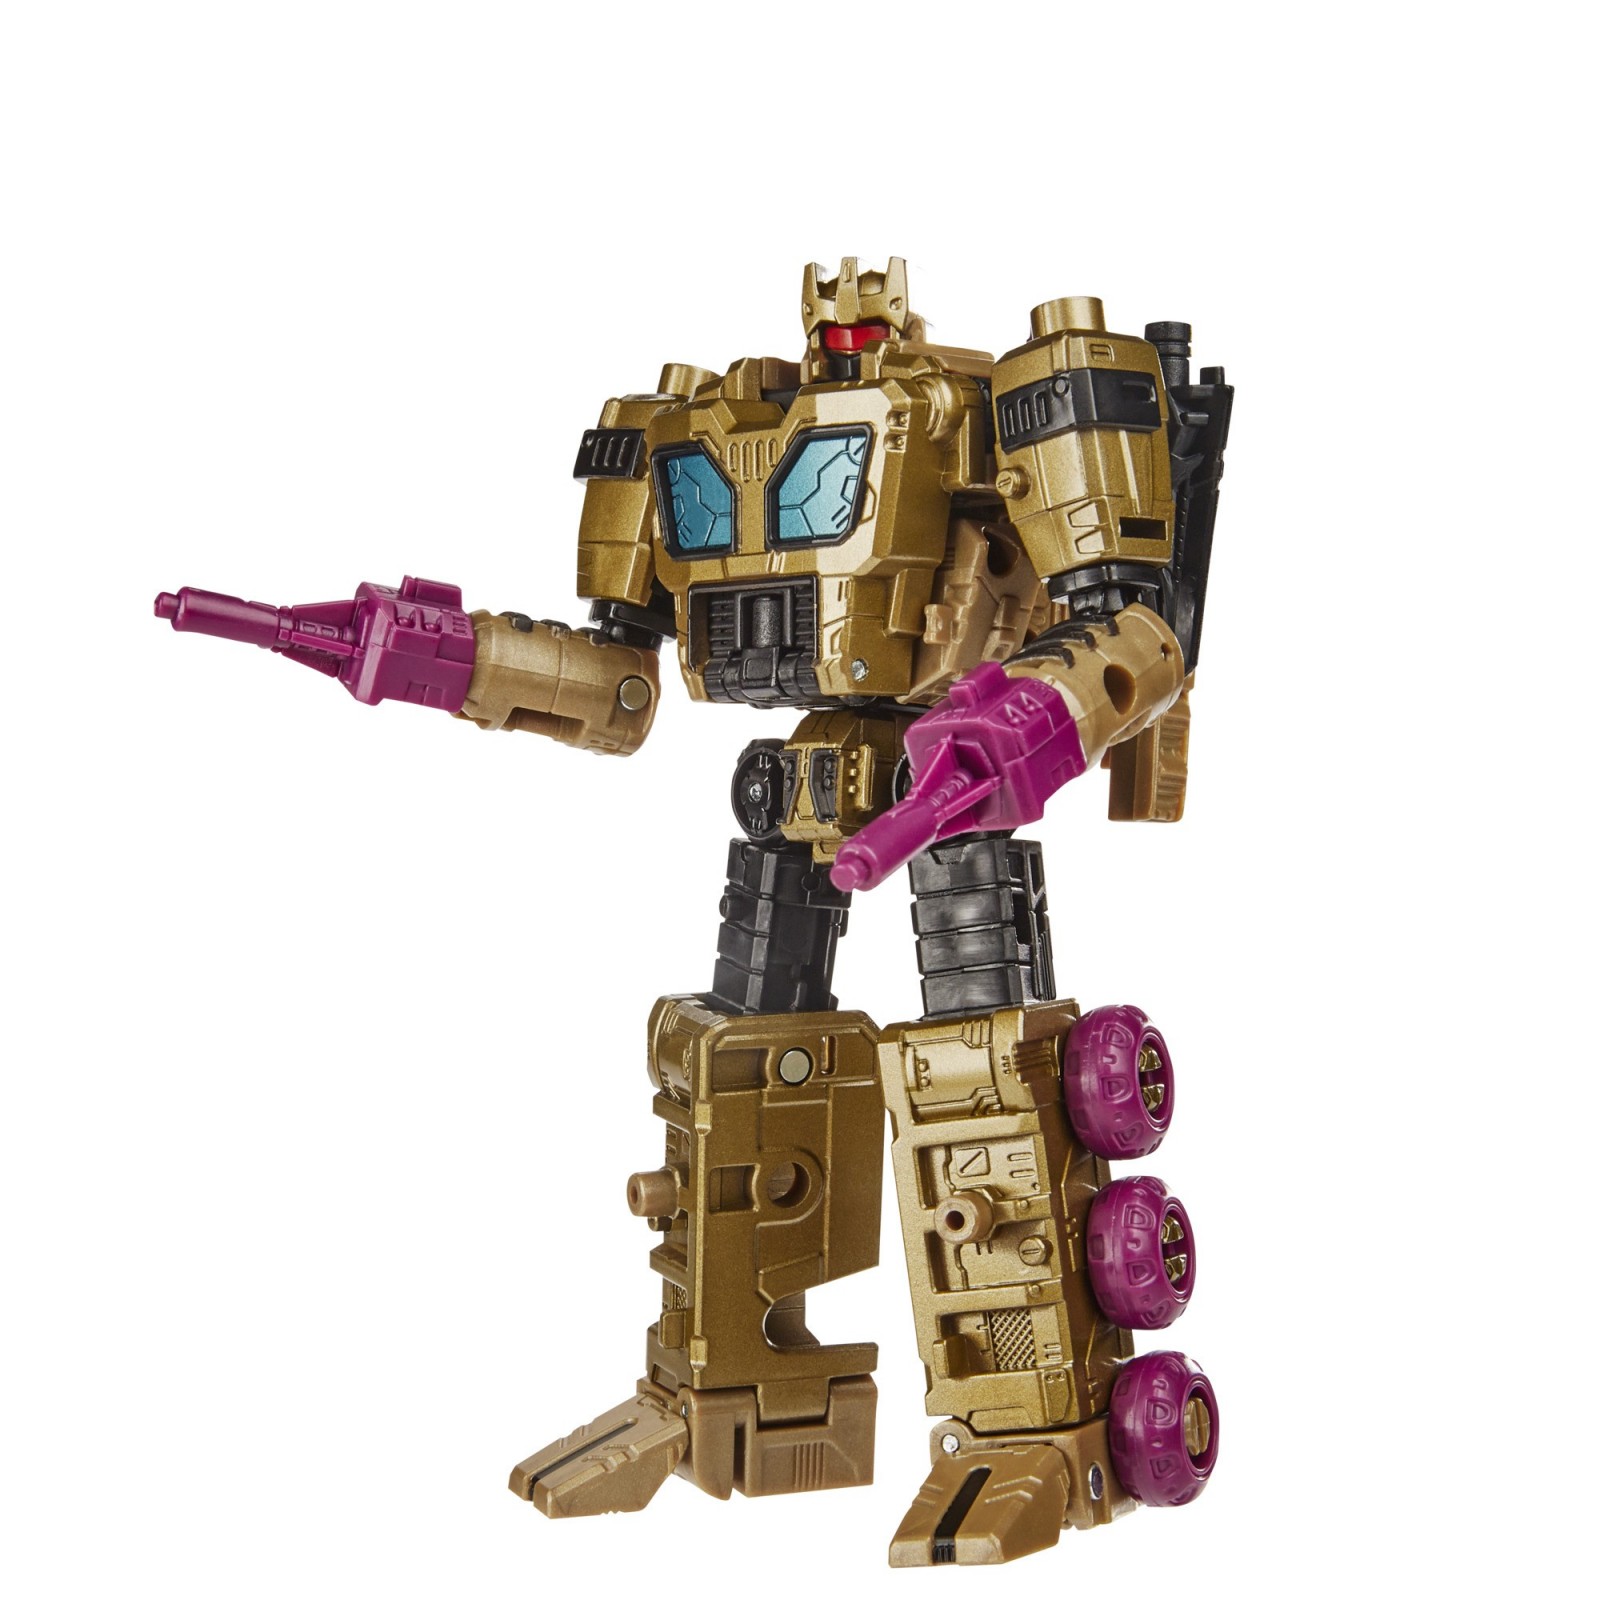 Transformers News: Generations Selects Black Roritchi, SIEGE Omega Supreme, Jetfire and more from Entertainment Earth